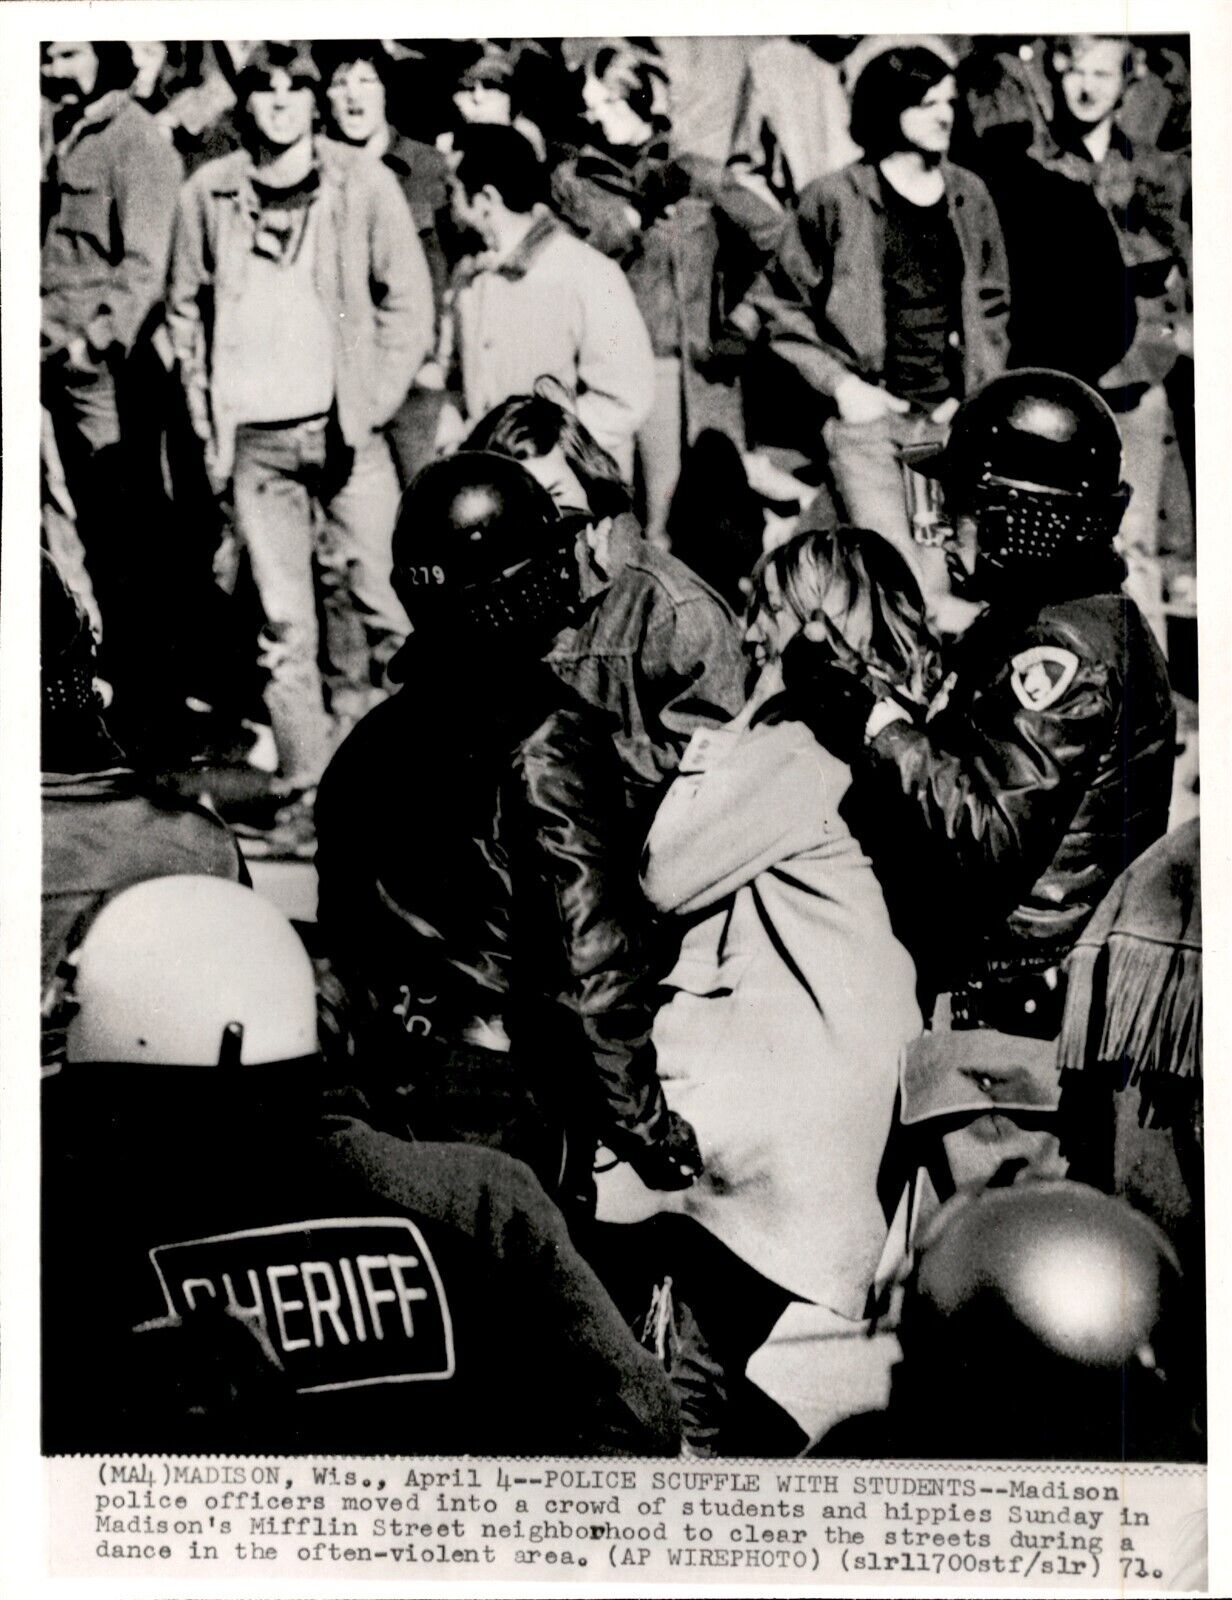 LG32 1971 AP Wire Photo MADISON POLICE SCUFFLE WITH HIPPY STUDENTS MIFFLIN ST